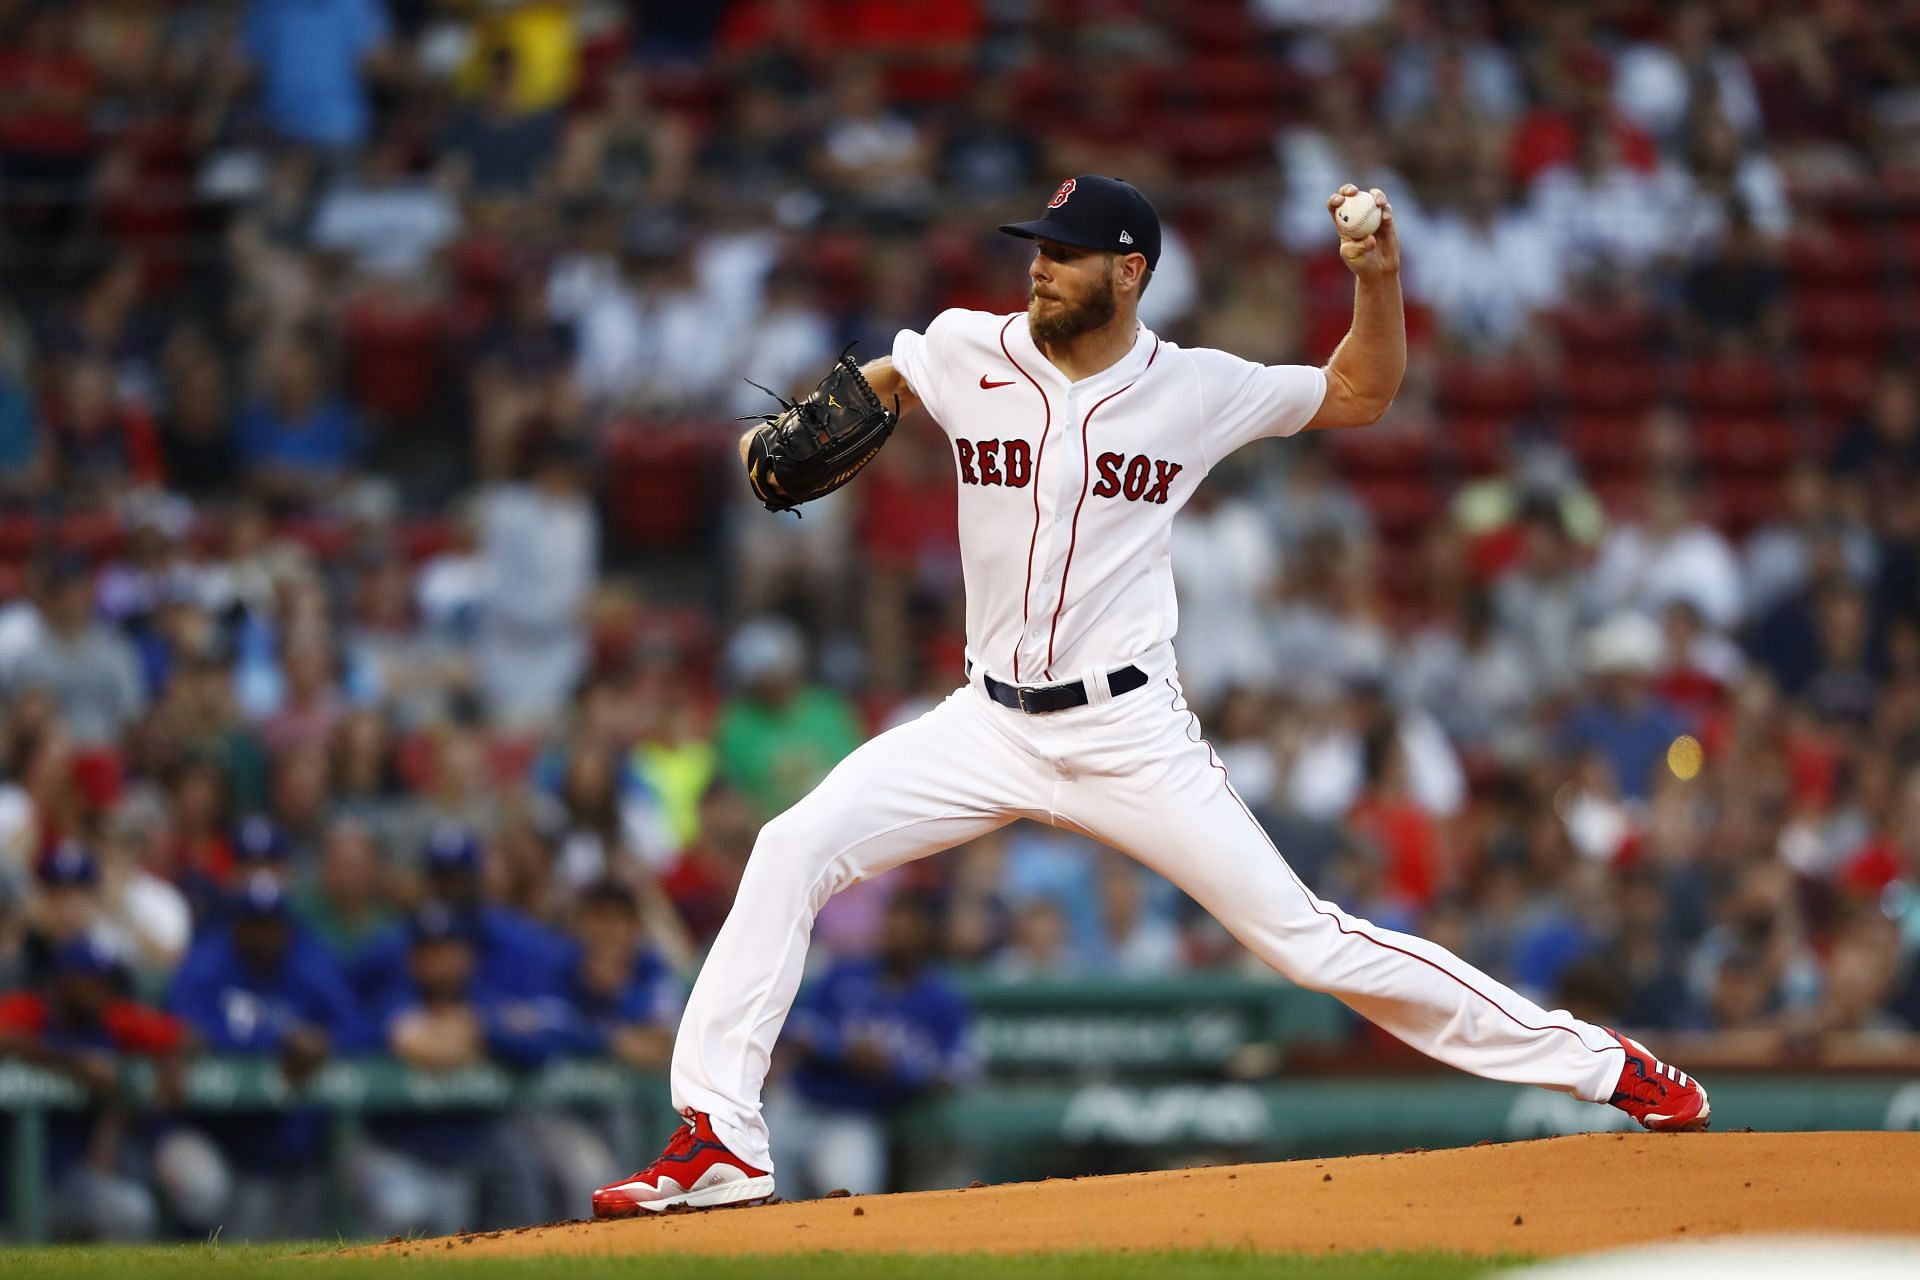 Sale pitching for the Boston Red Sox